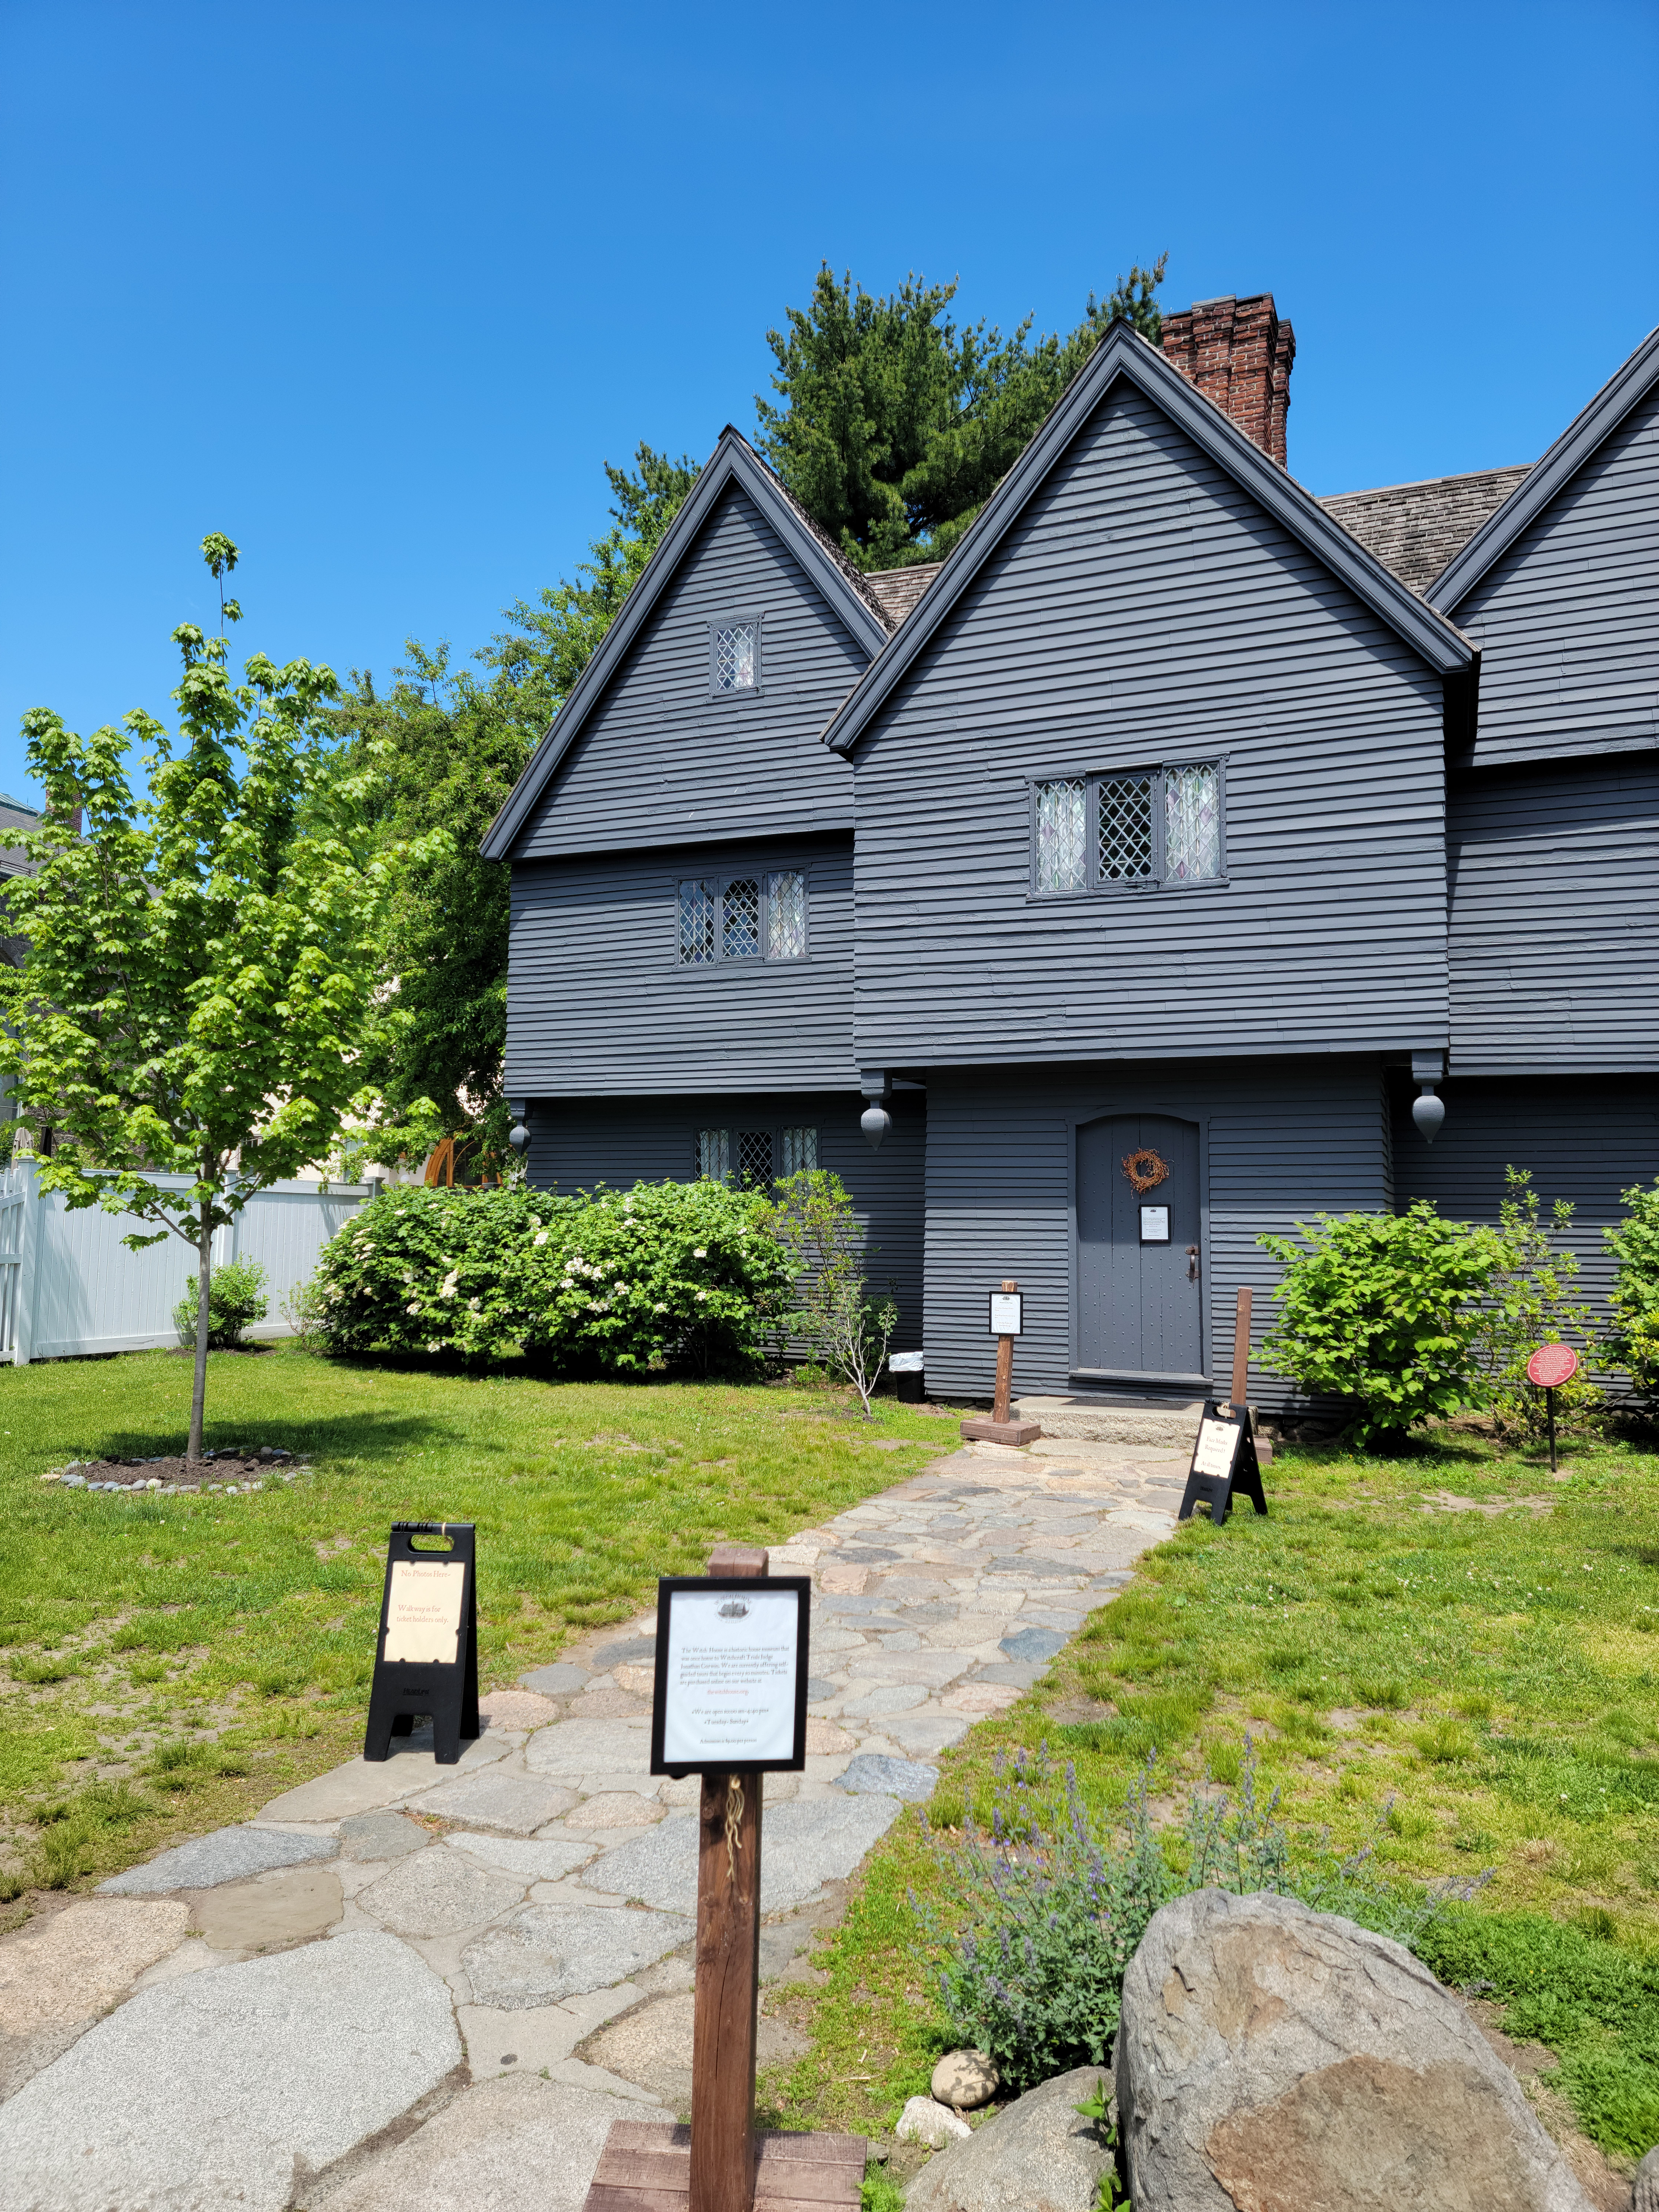 Picture of a place: The Witch House at Salem